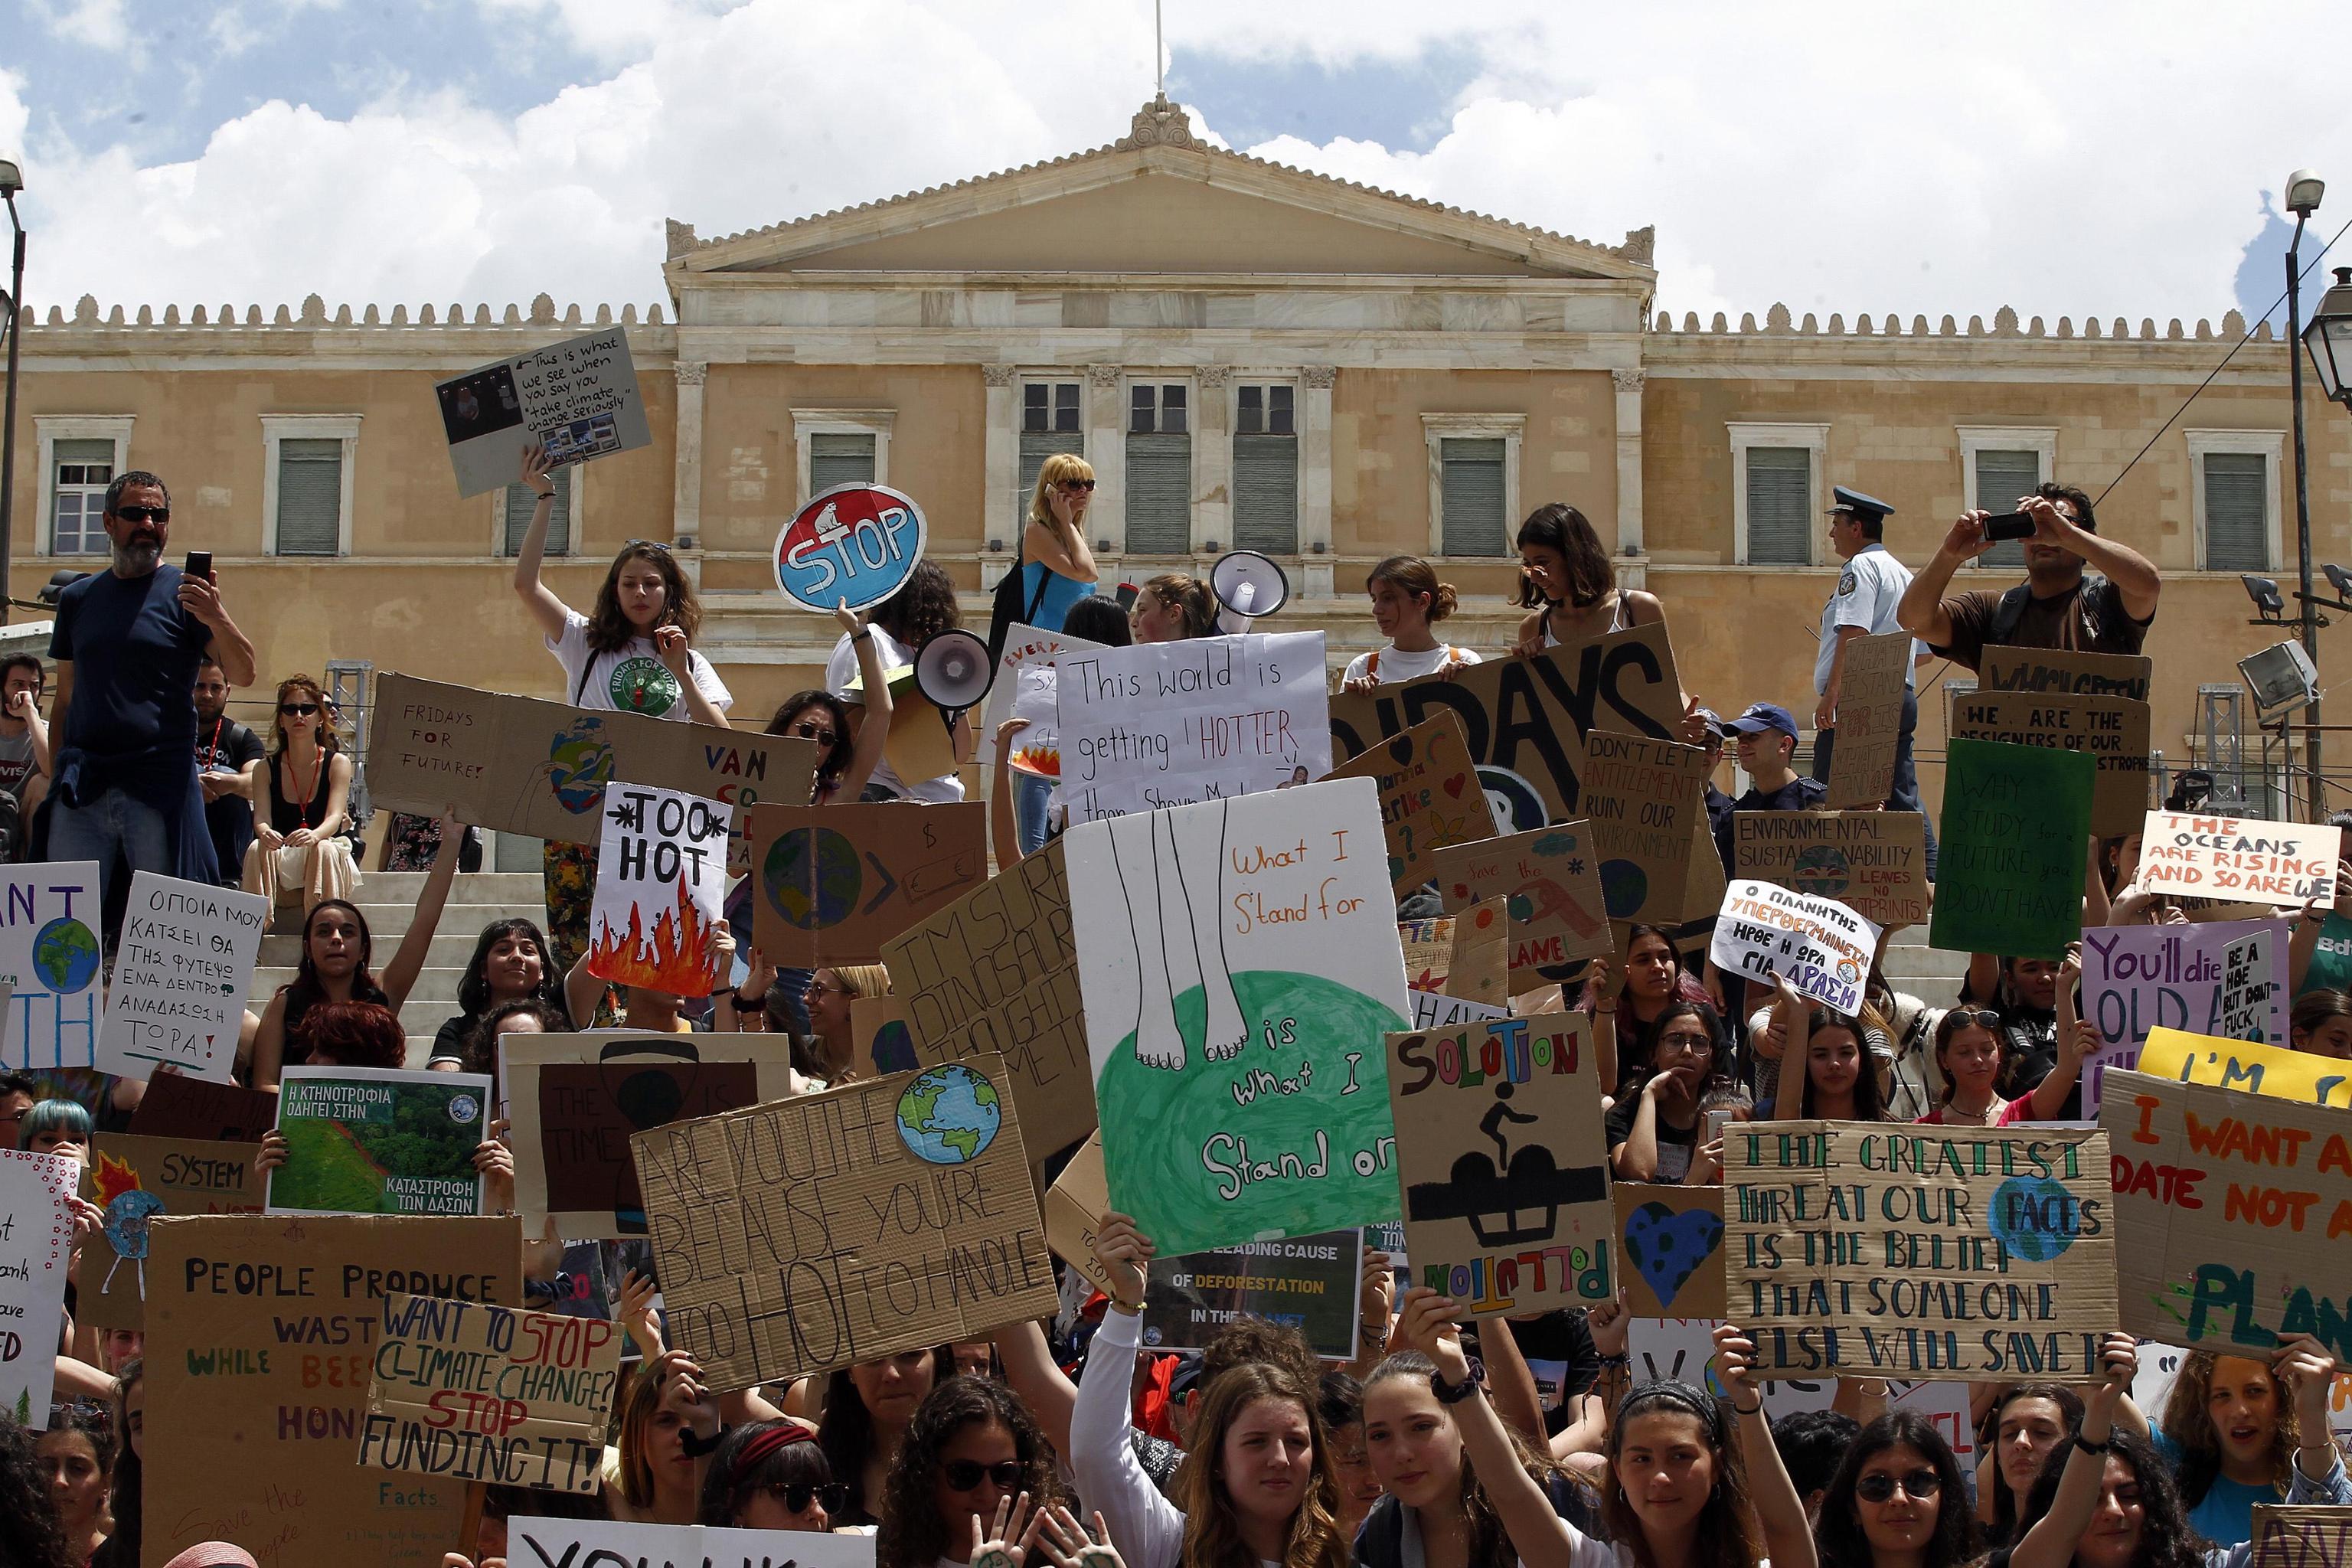 epa07597089 Students take part in a demonstration against climate change during a 'Fridays for Future' in front of the greek parliament, in Athens, Greece, 24 May 2019. Youth and students across the world are taking part in a student strike movement called #FridayForFuture which was sparked by Greta Thunberg of Sweden, a sixteen year old climate activist who has been protesting outside the Swedish parliament every Friday since August 2018.  EPA/ALEXANDROS VLACHOS